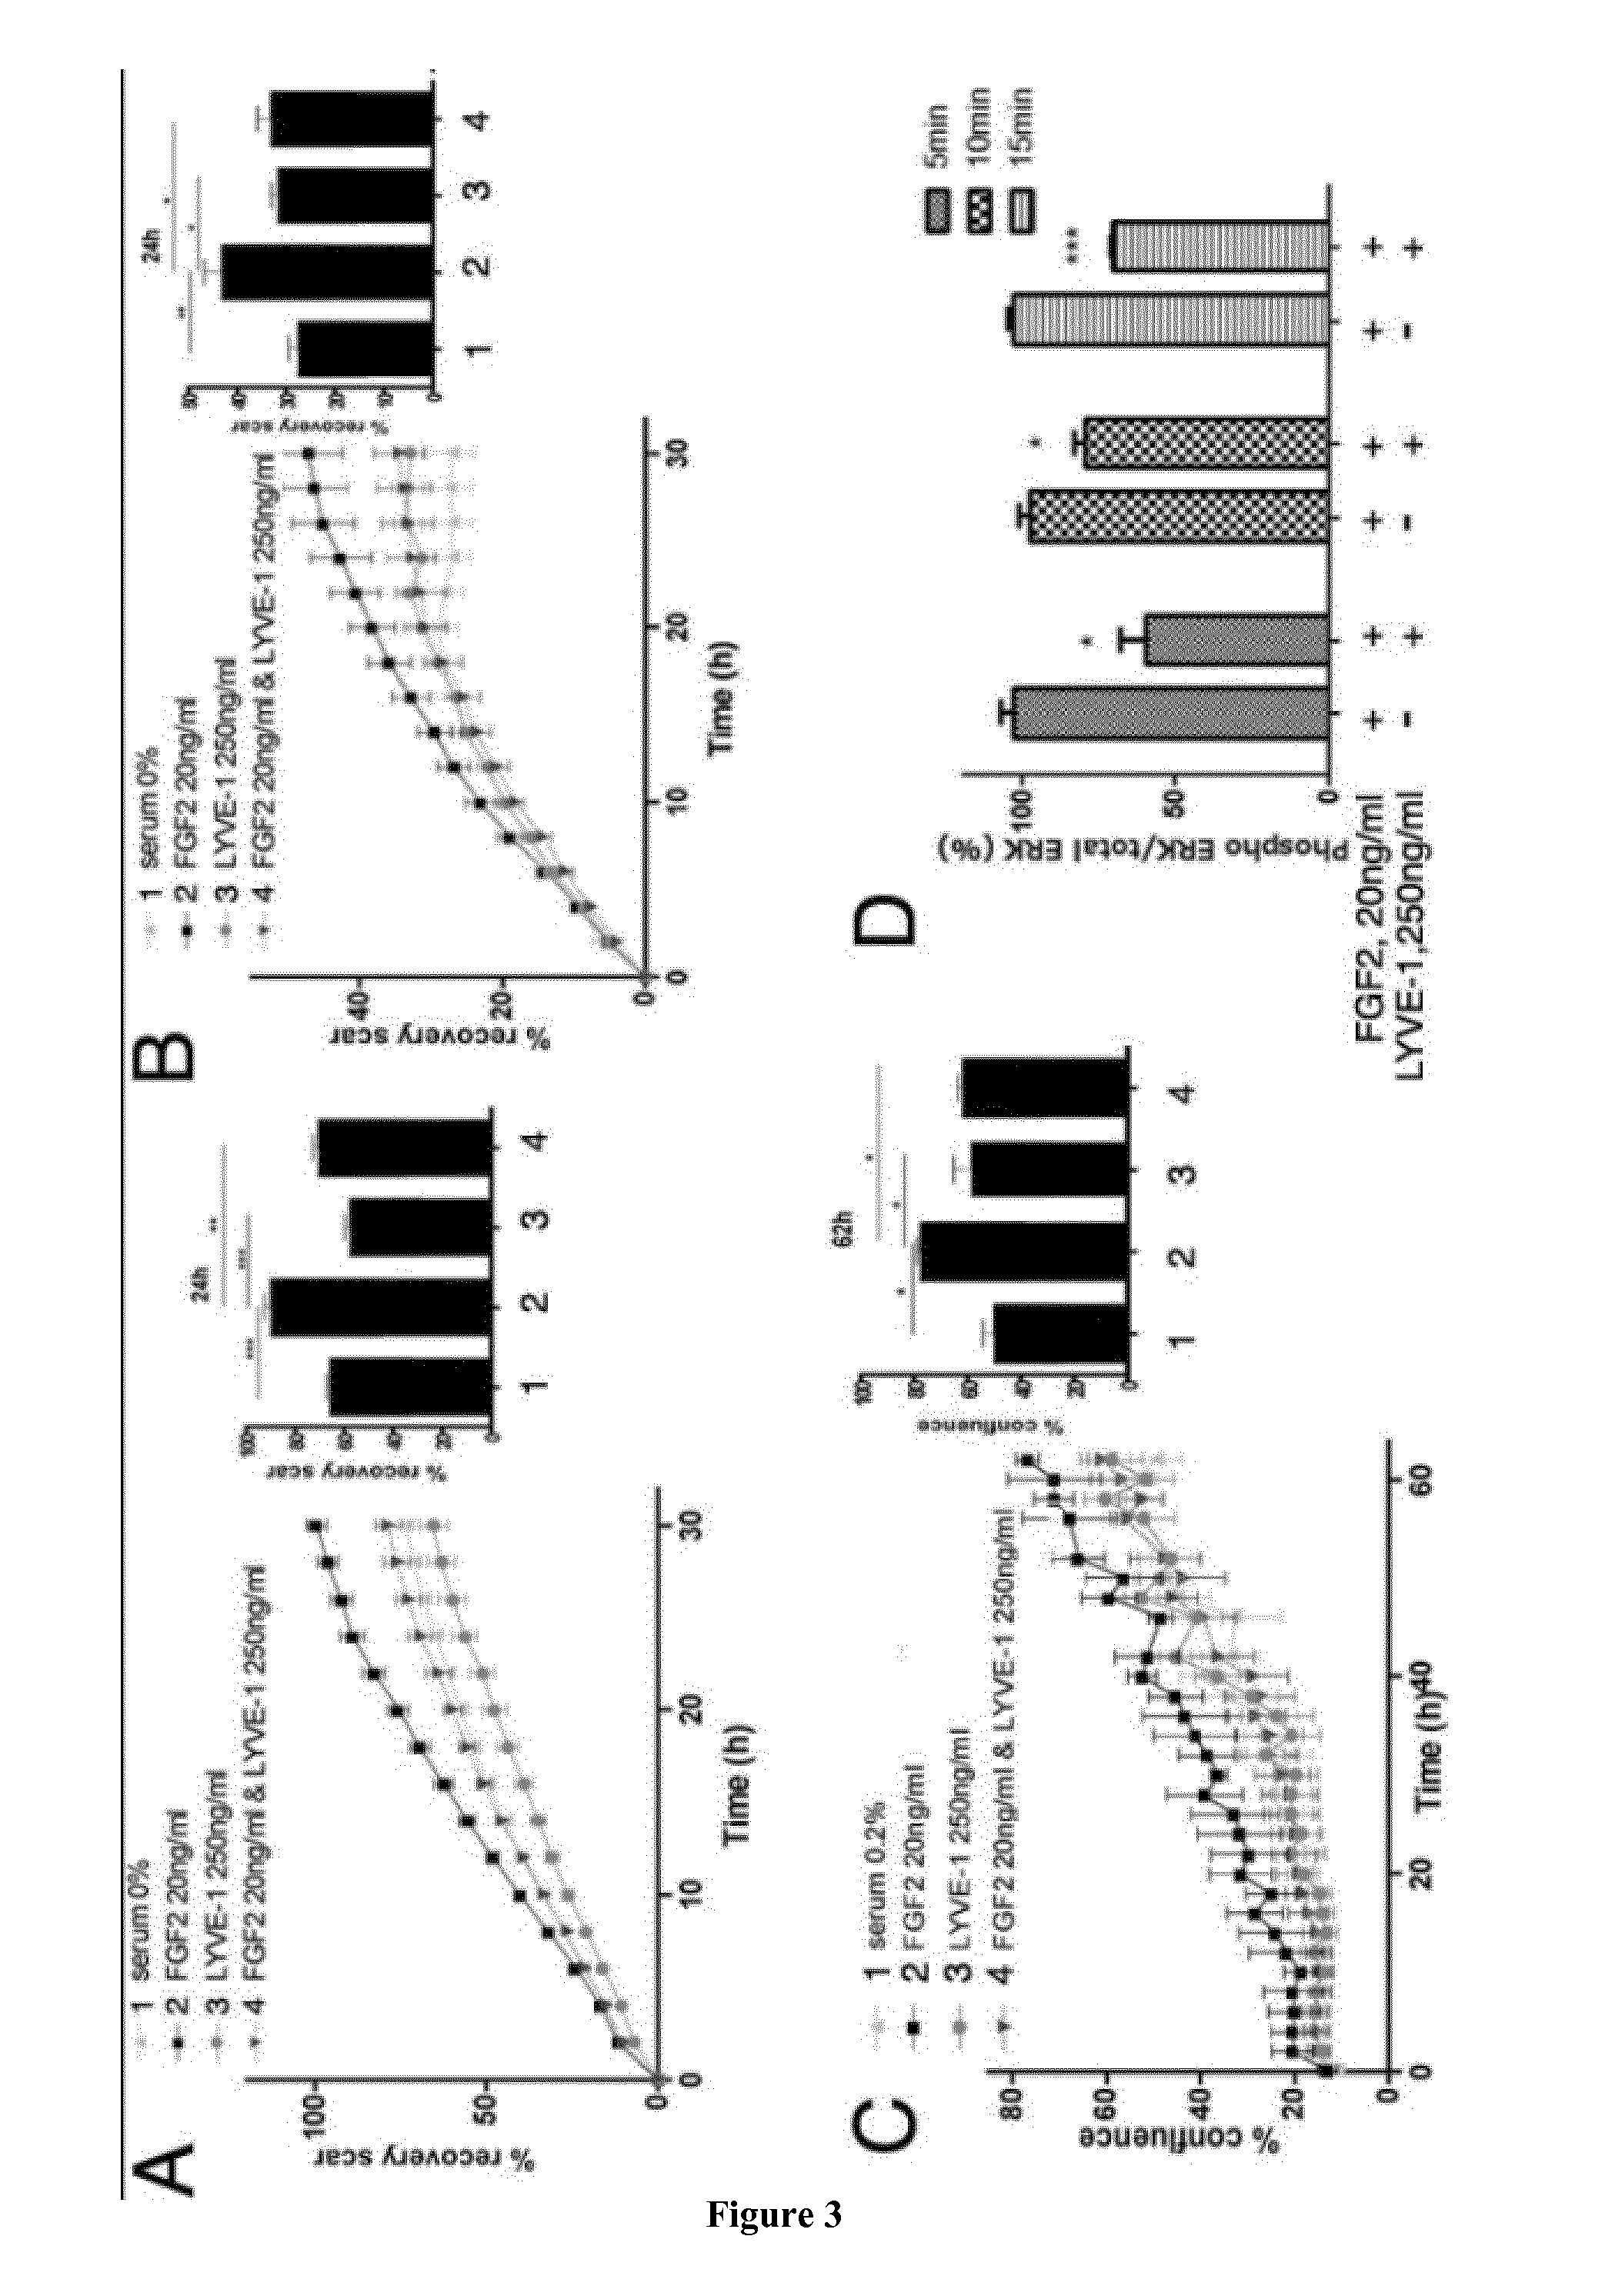 Lyve-1 antagonists for preventing or treating a pathological condition associated with lymphangiogenesis